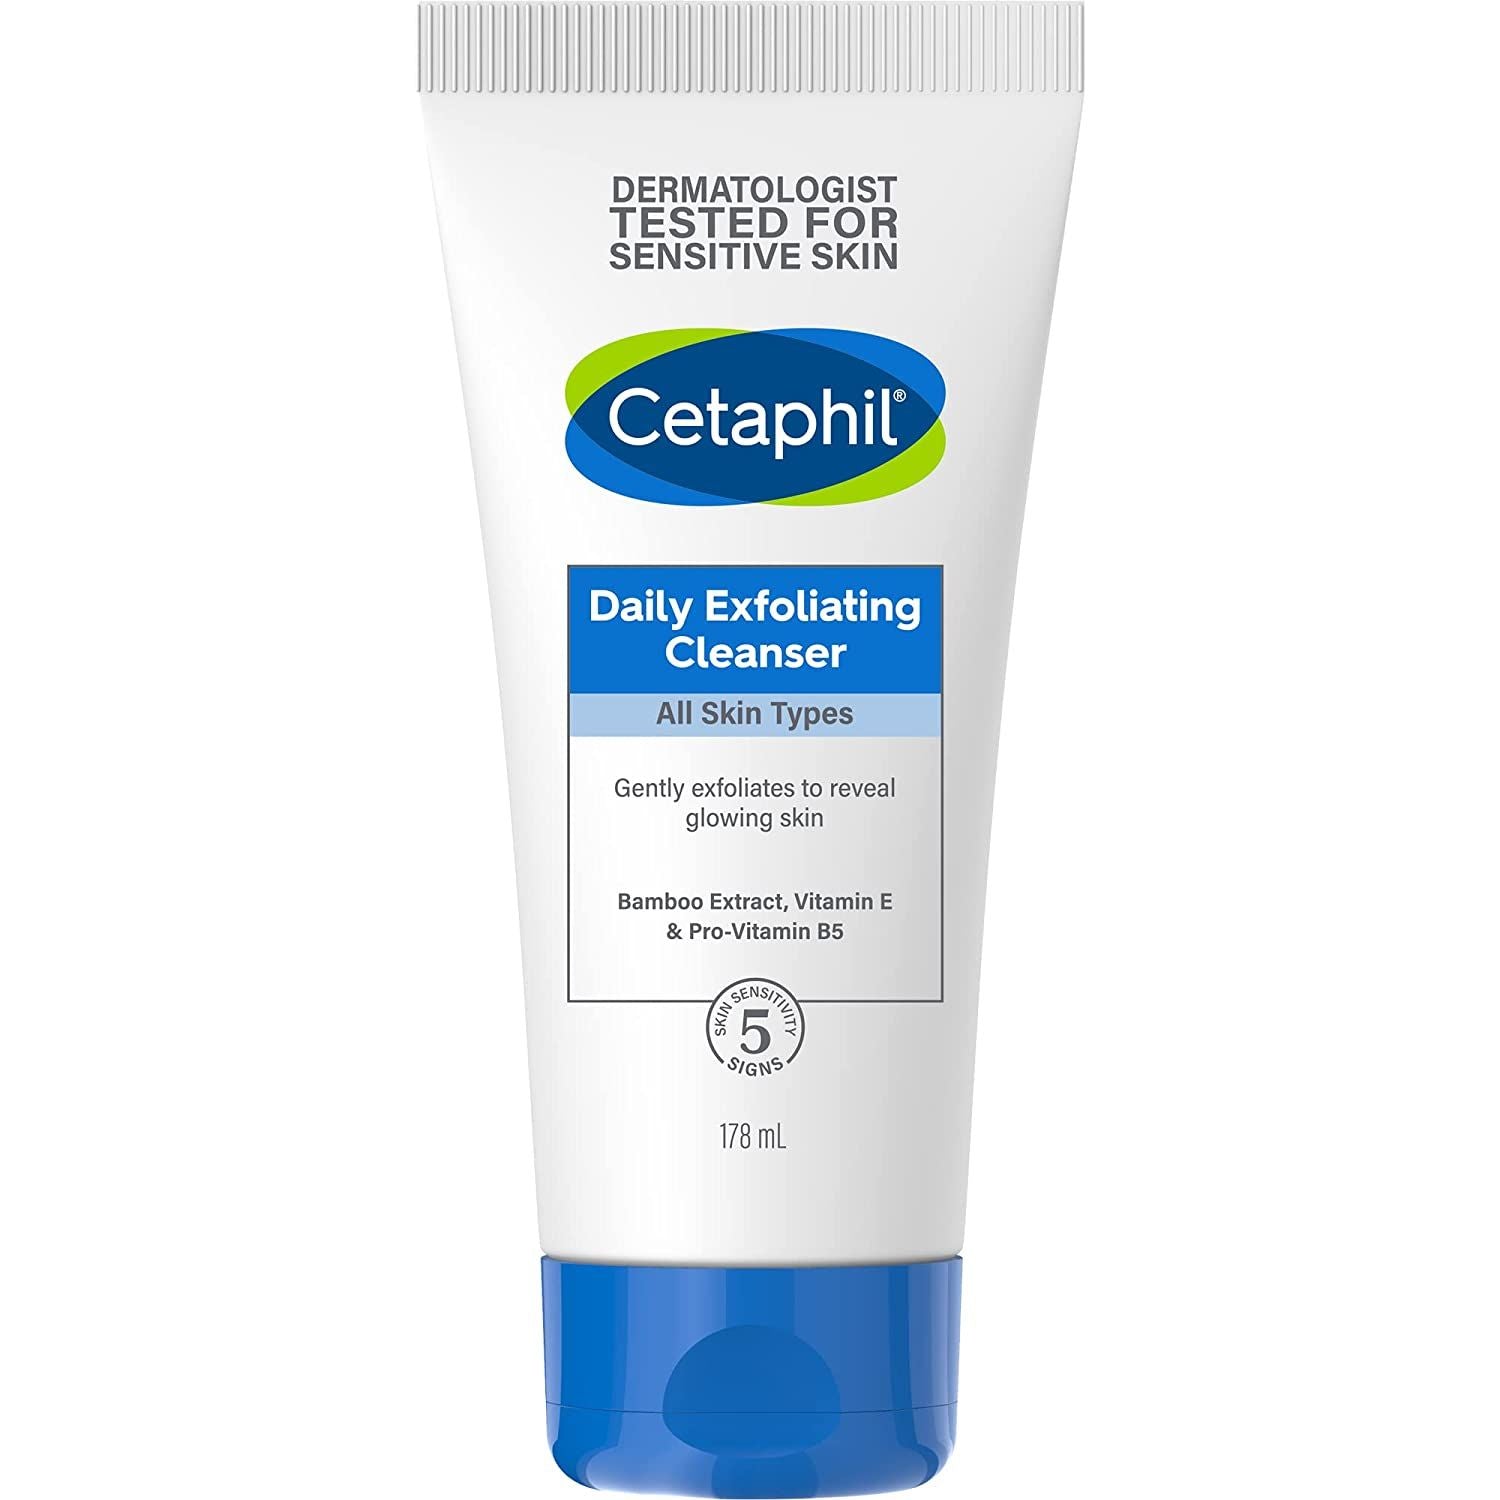 Cetaphil Face Wash Daily Exfoliating Cleanser For All Skin Types, 178ml Exfoliating Face Scrub With Vitamin E, B5 & Bamboo Extract